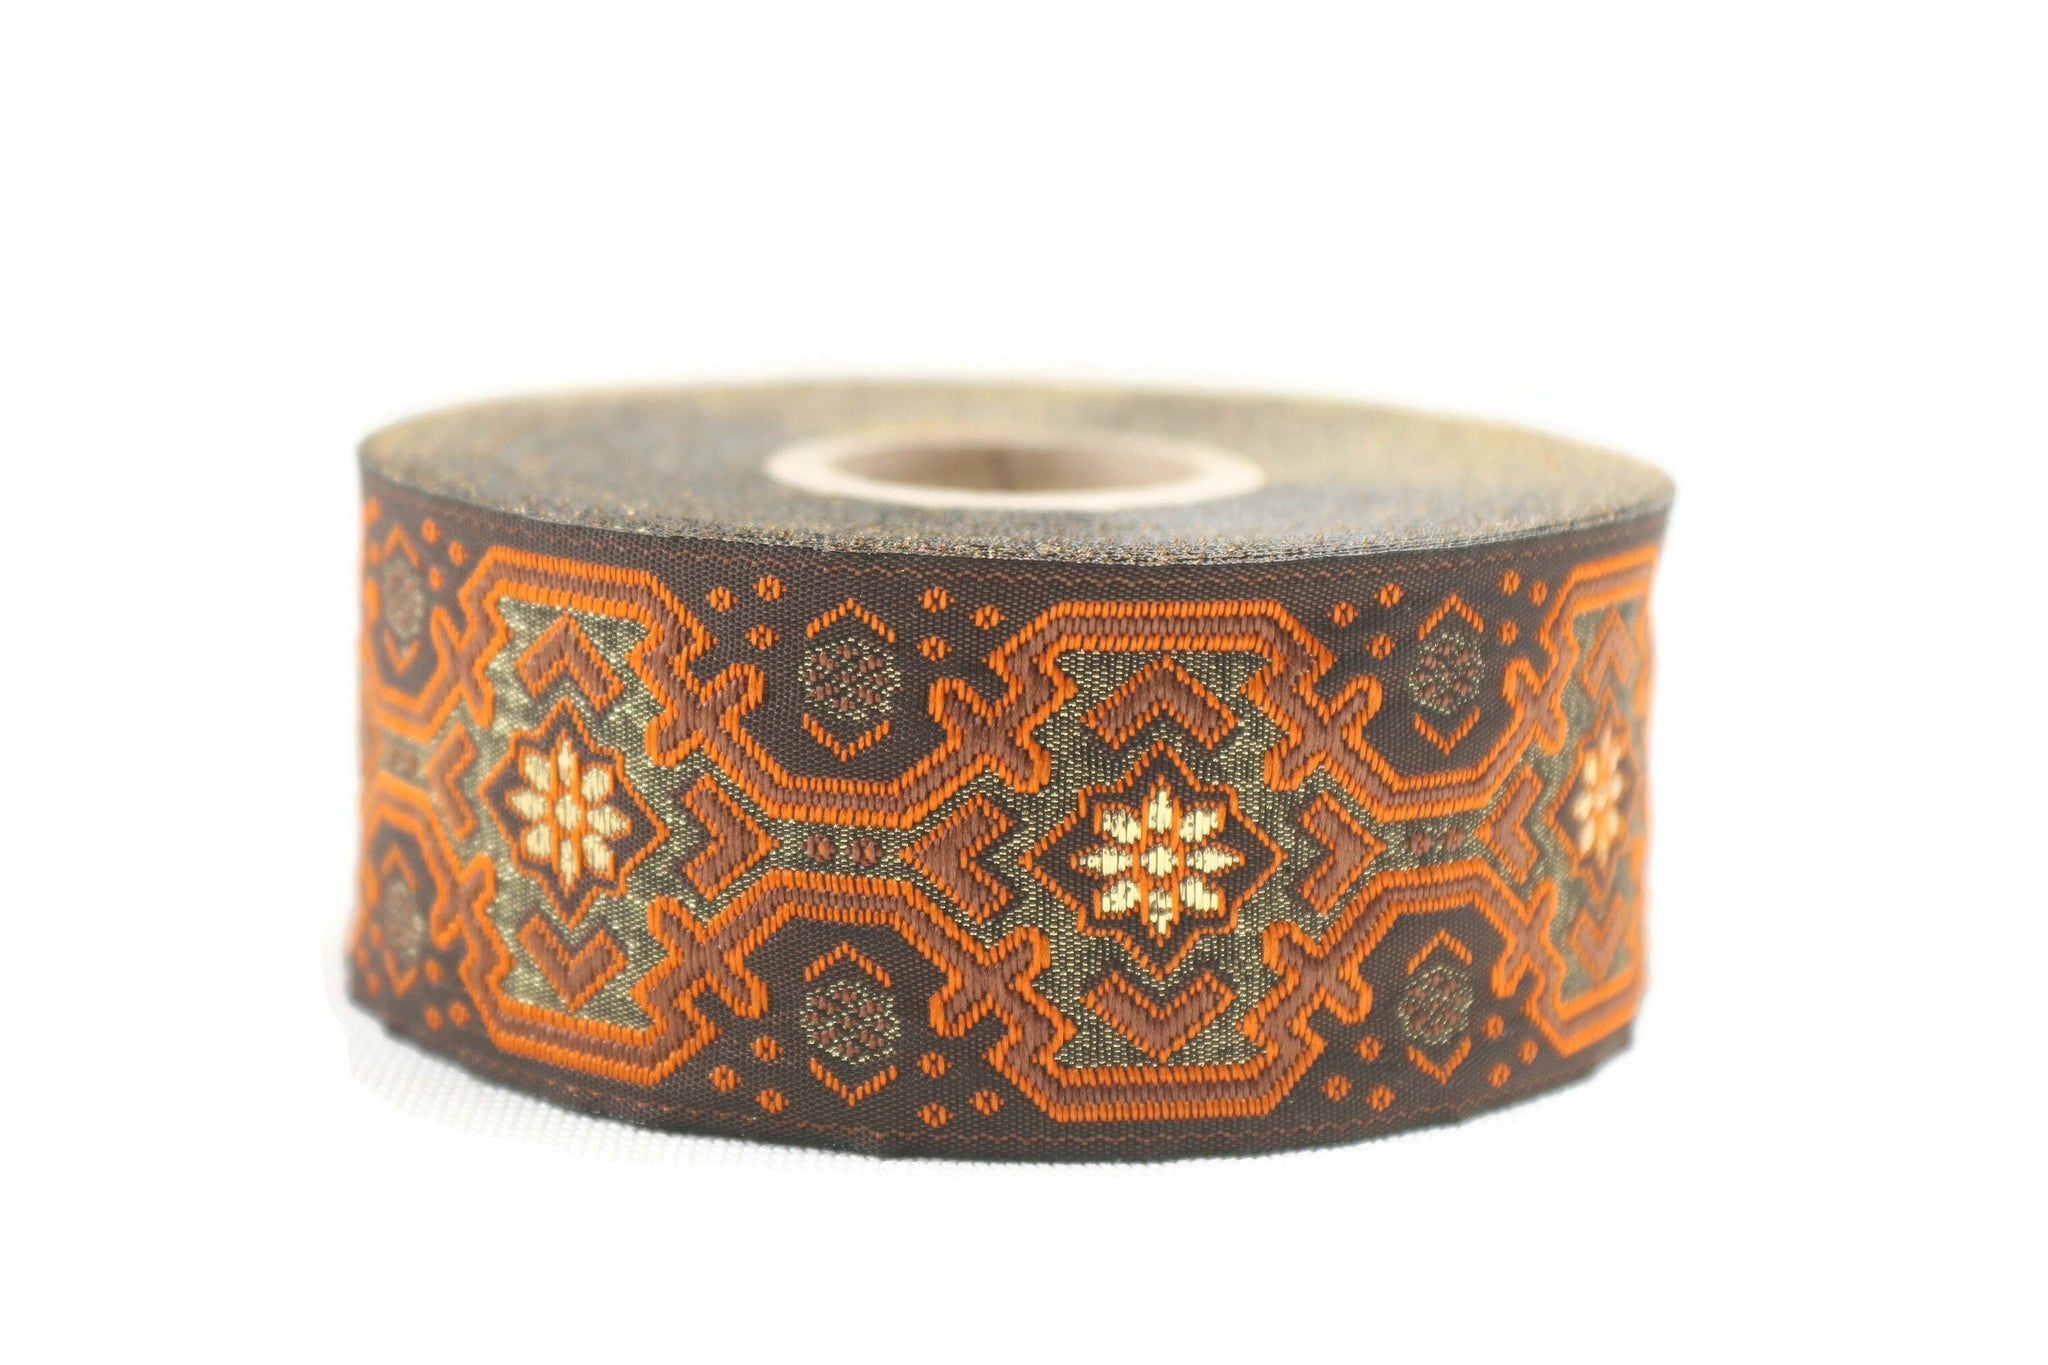 35 mm Vintage ribbon, Jacquard trims (1.37 inches), Decorative Craft Ribbon, Sewing trim, trim by the yards, embroidered ribbon, CNK10